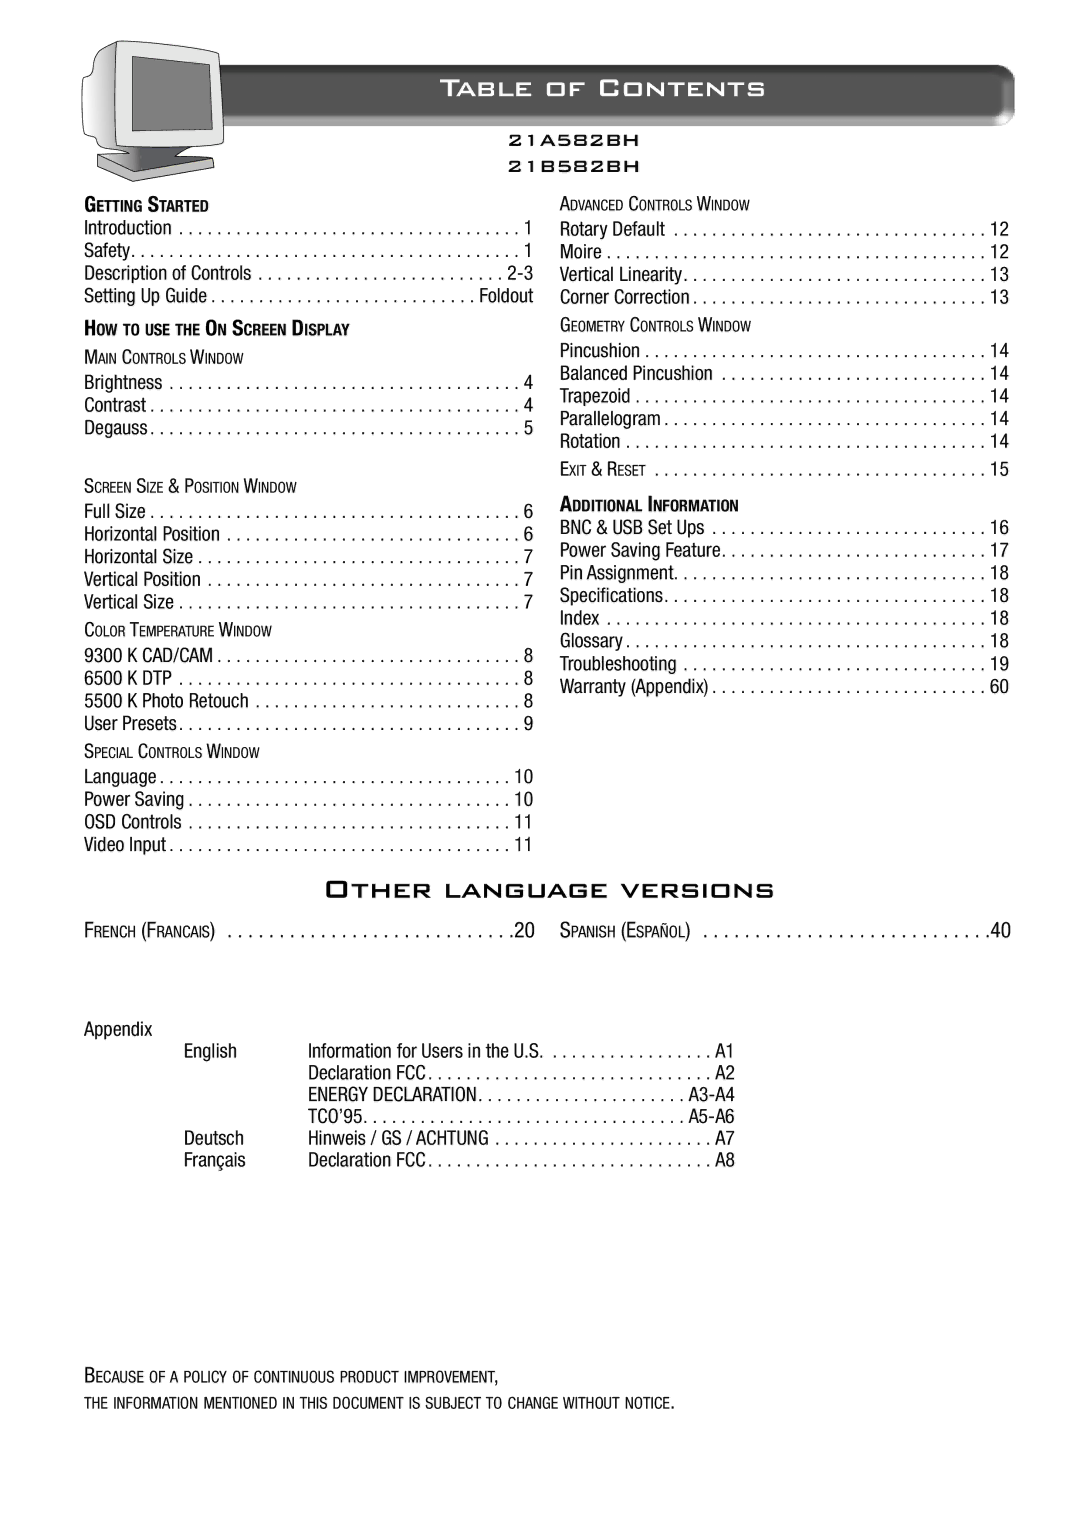 Philips 21B582BH, 21A582BH specifications Table of Contents 